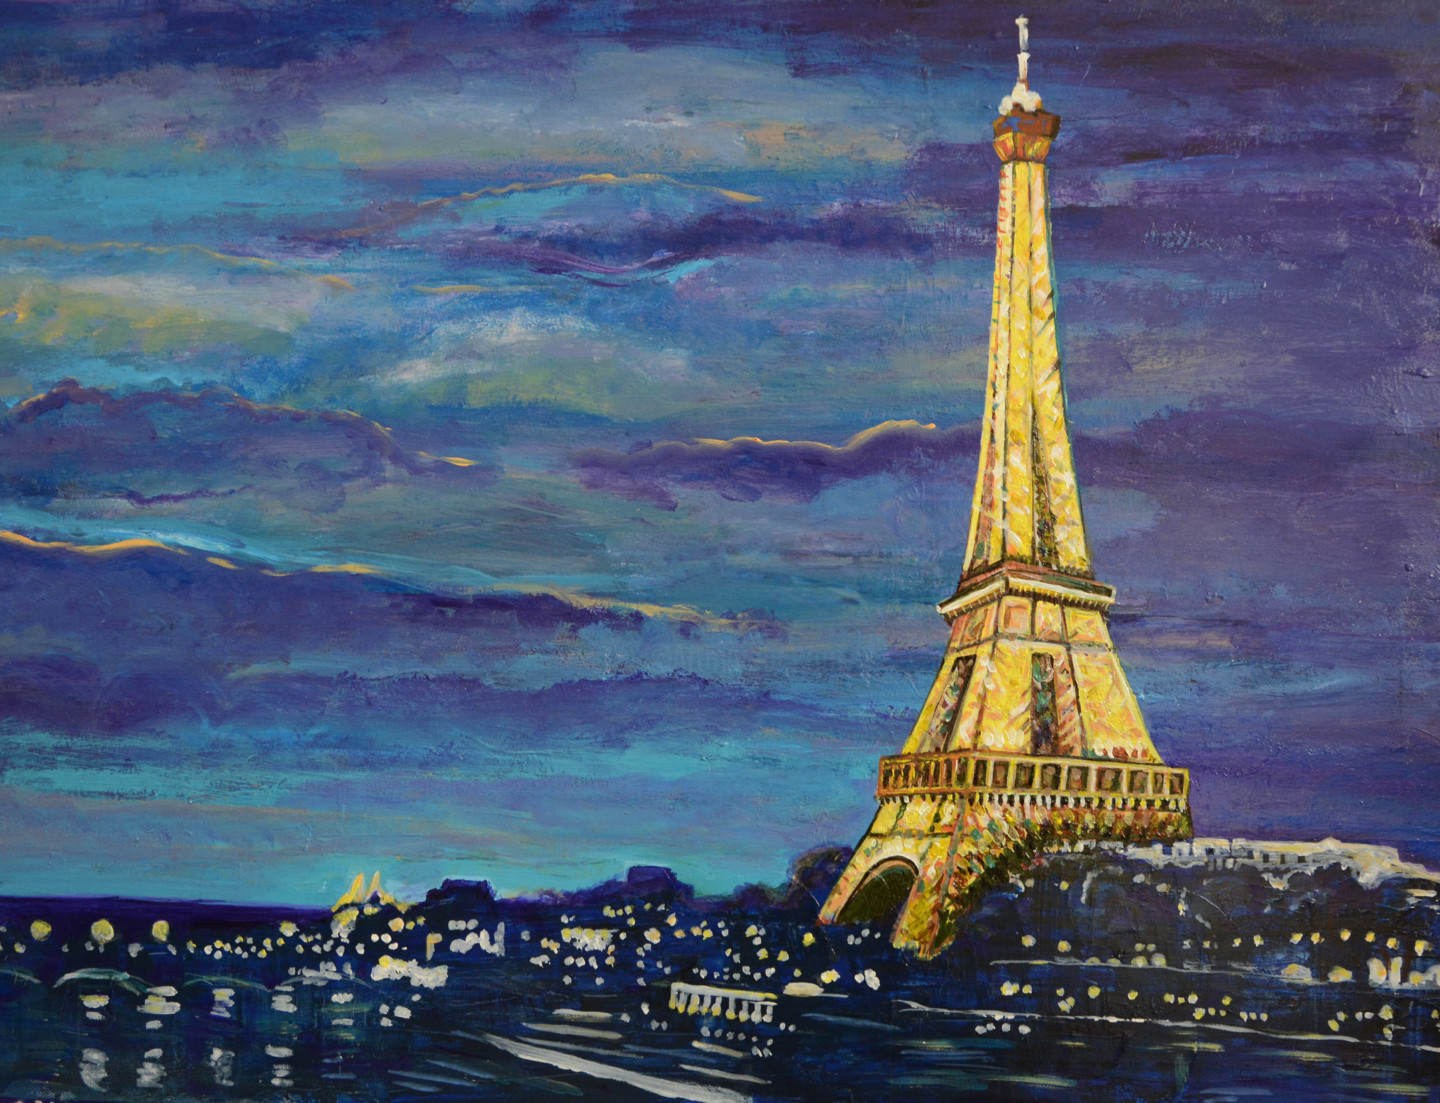 The Eiffel Tower Painting by Oxana Grachev | Artmajeur